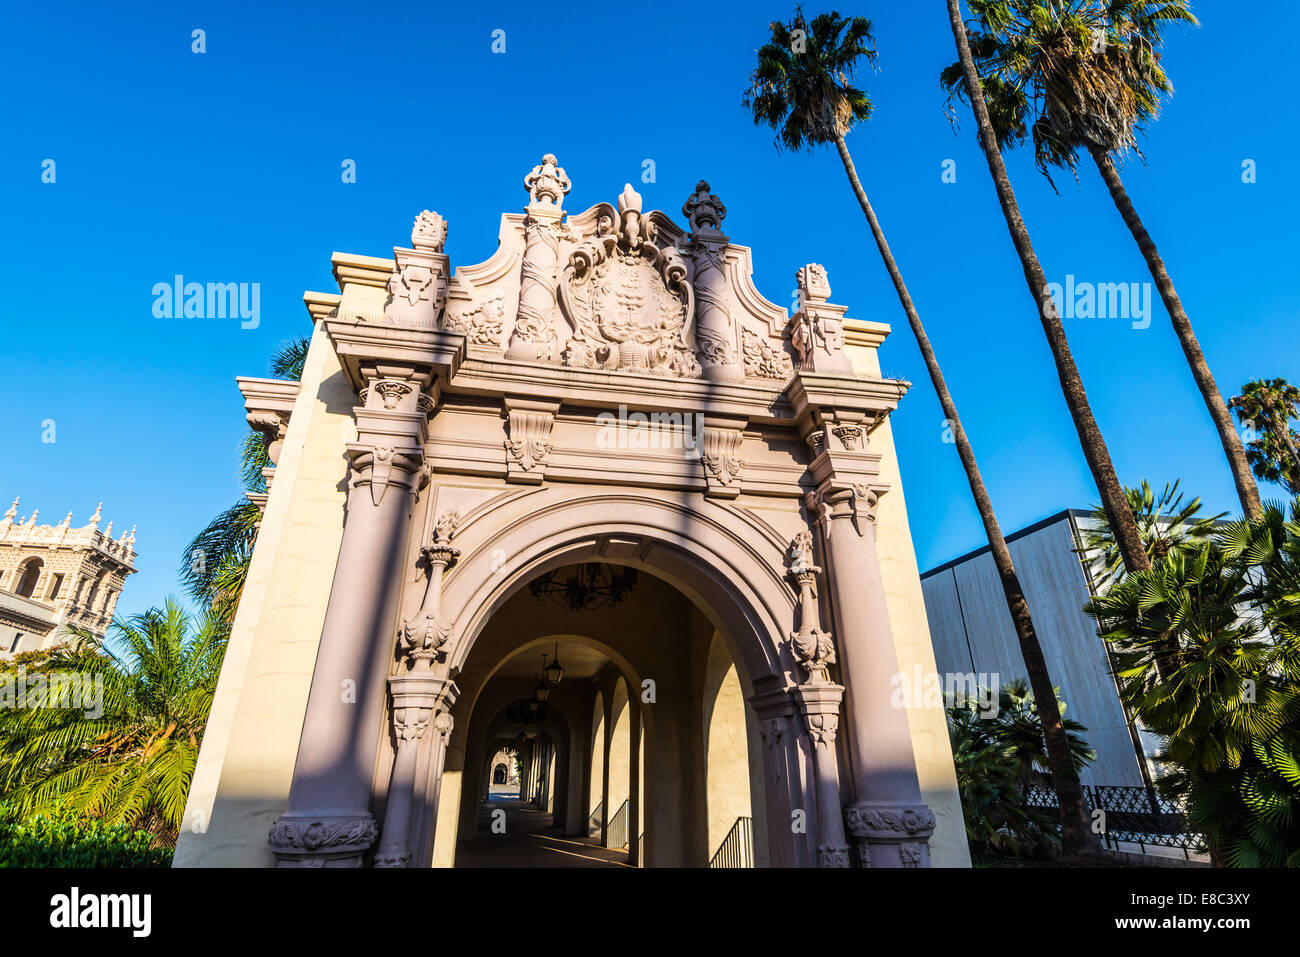 Walking path leading into an arched structure at Balboa Park. San Diego,California, United States.. Stock Photo